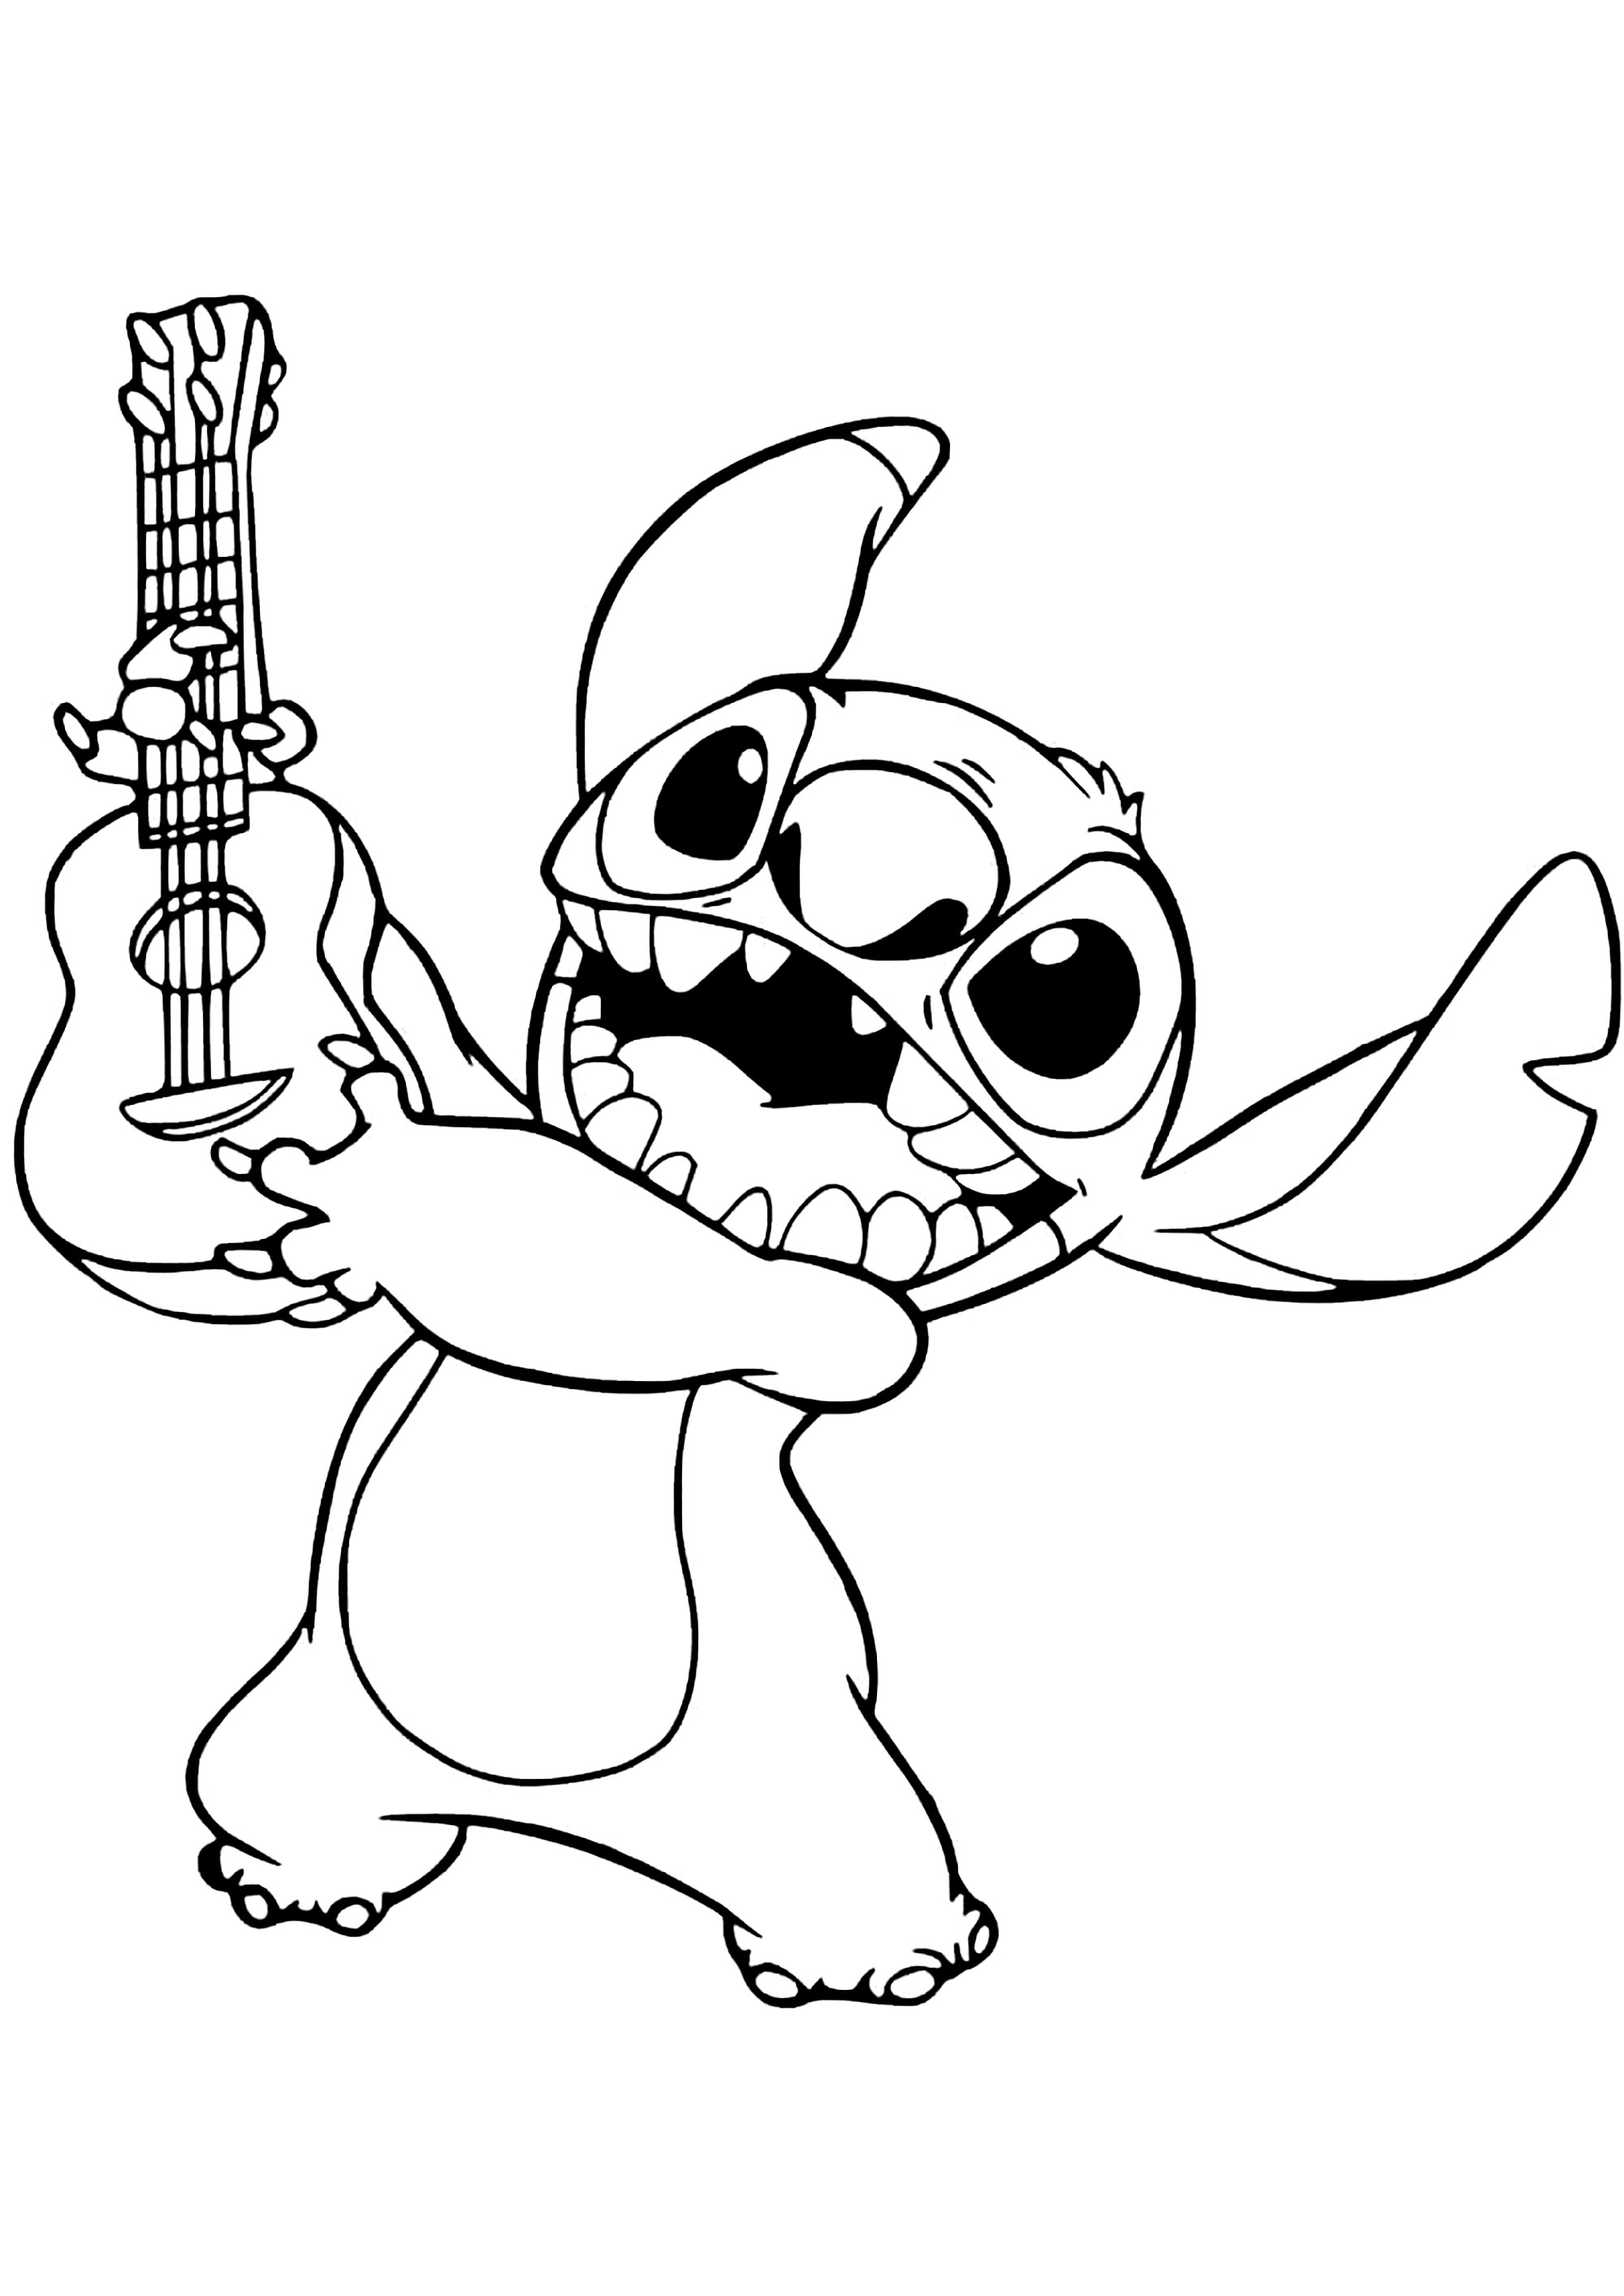 Lilo And Stitch coloring page to download